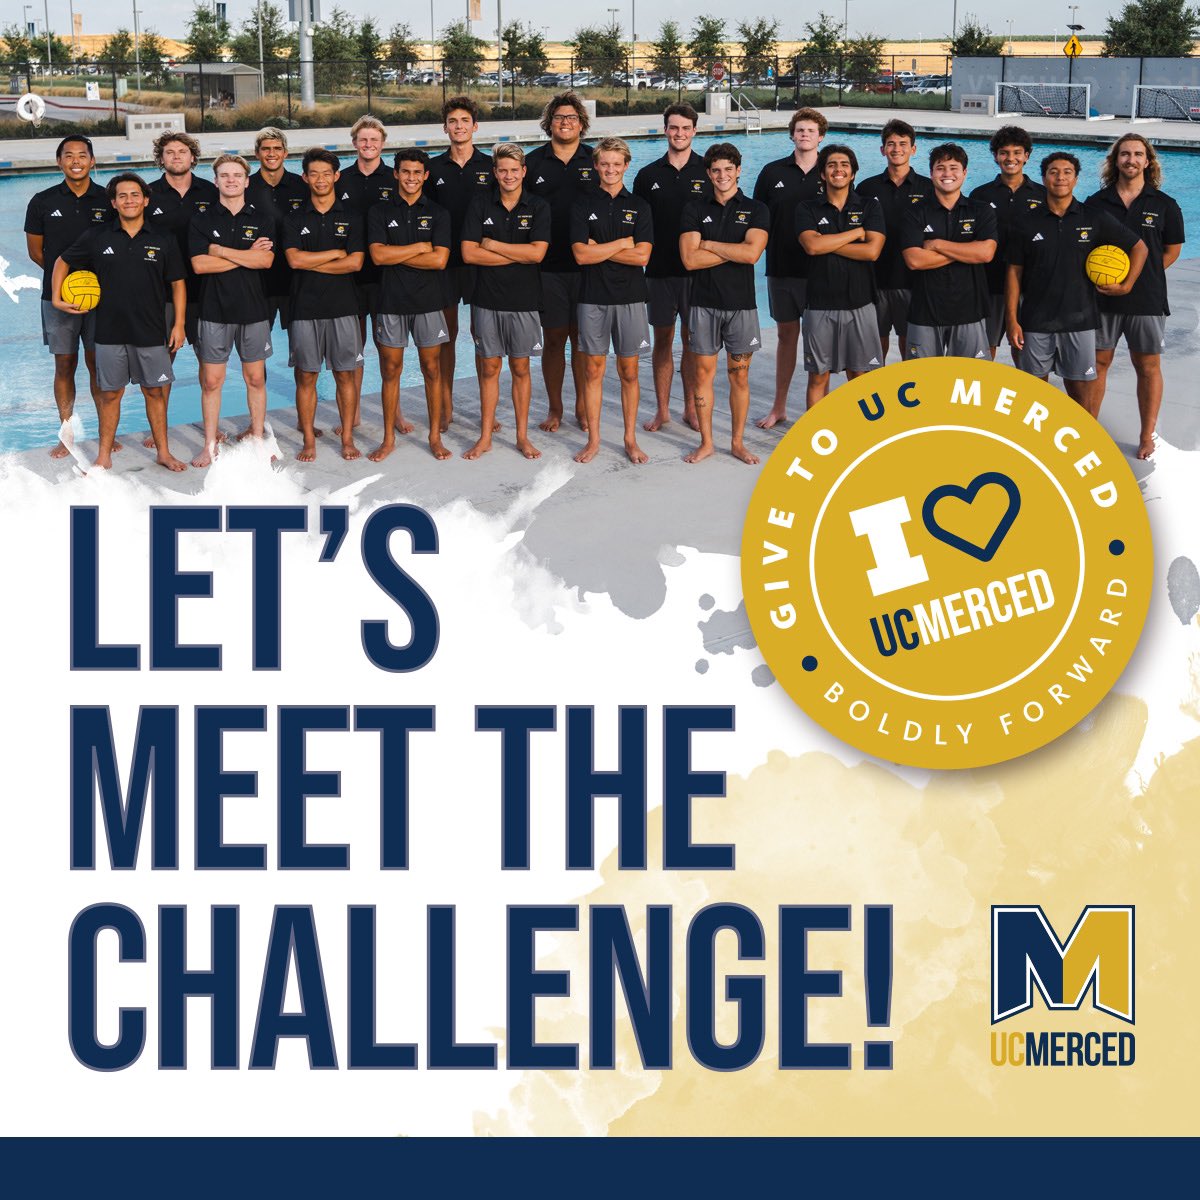 UC Merced’s Men’s Water Polo needs to raise $2,355 by Dec. 31, 2023 to unlock a huge $25,000 challenge gift from The Law Offices of Snell & Wilmer! Help them by making a gift of any size here 🔗 ucm.edu/ZSQSe8 #GivetoUCMerced